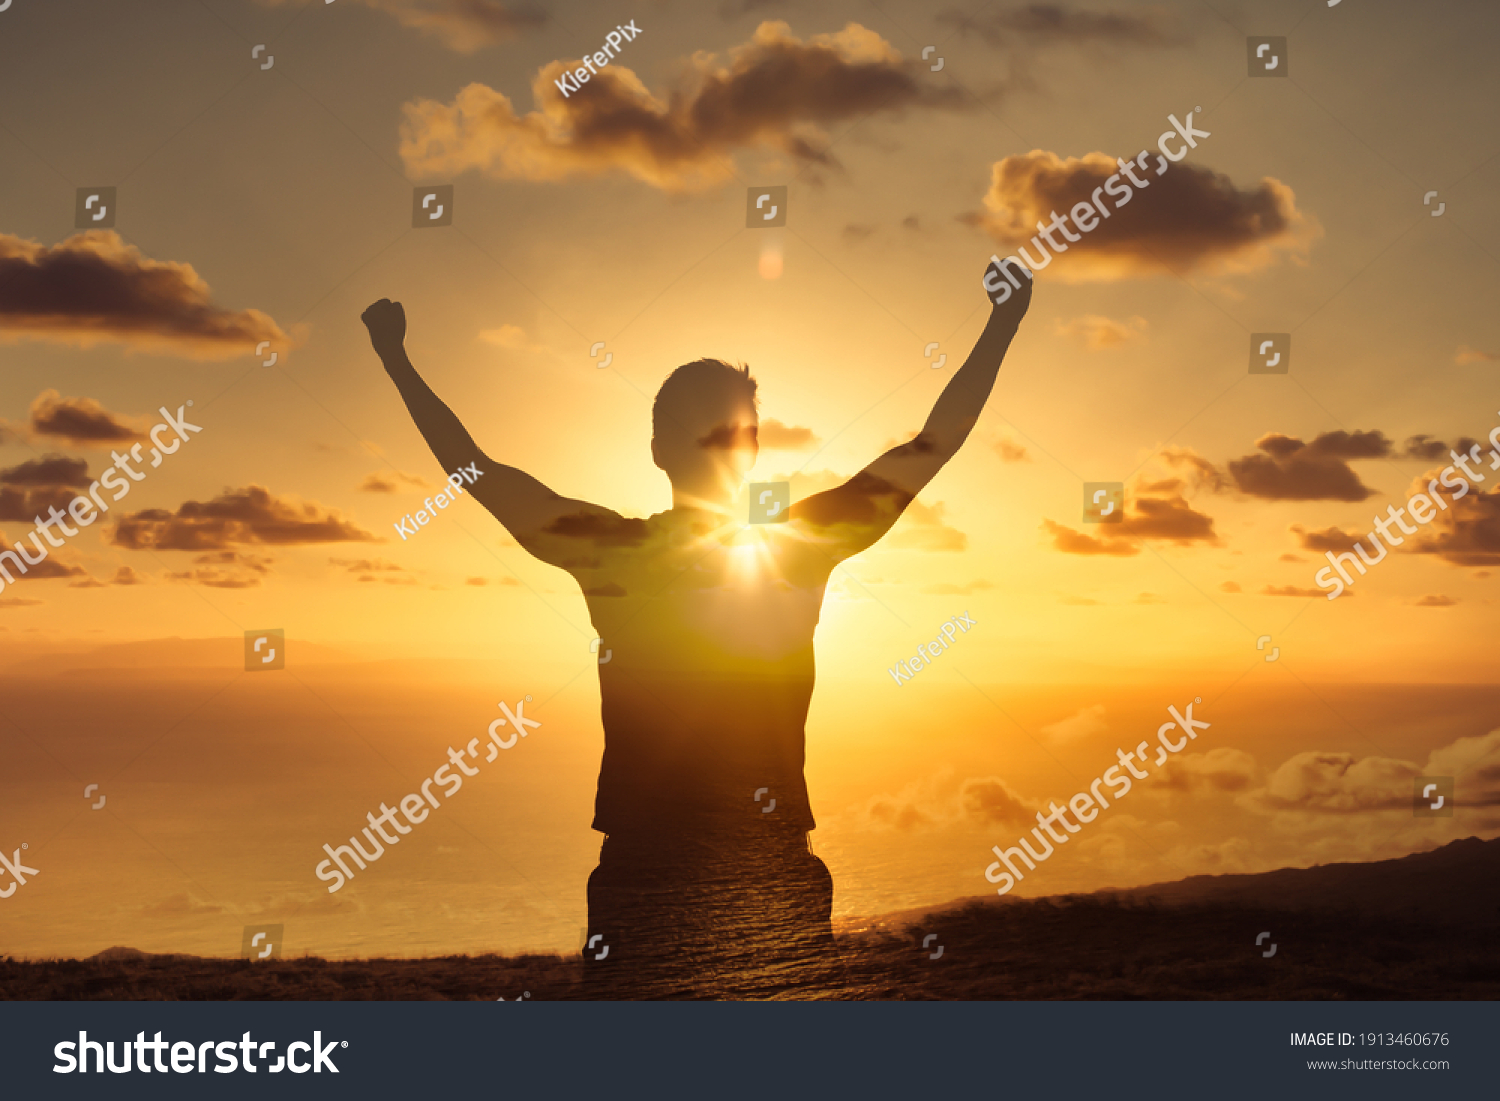 Strong powerful man flexing his arms up to the sky. Mental and physical strength concept. #1913460676